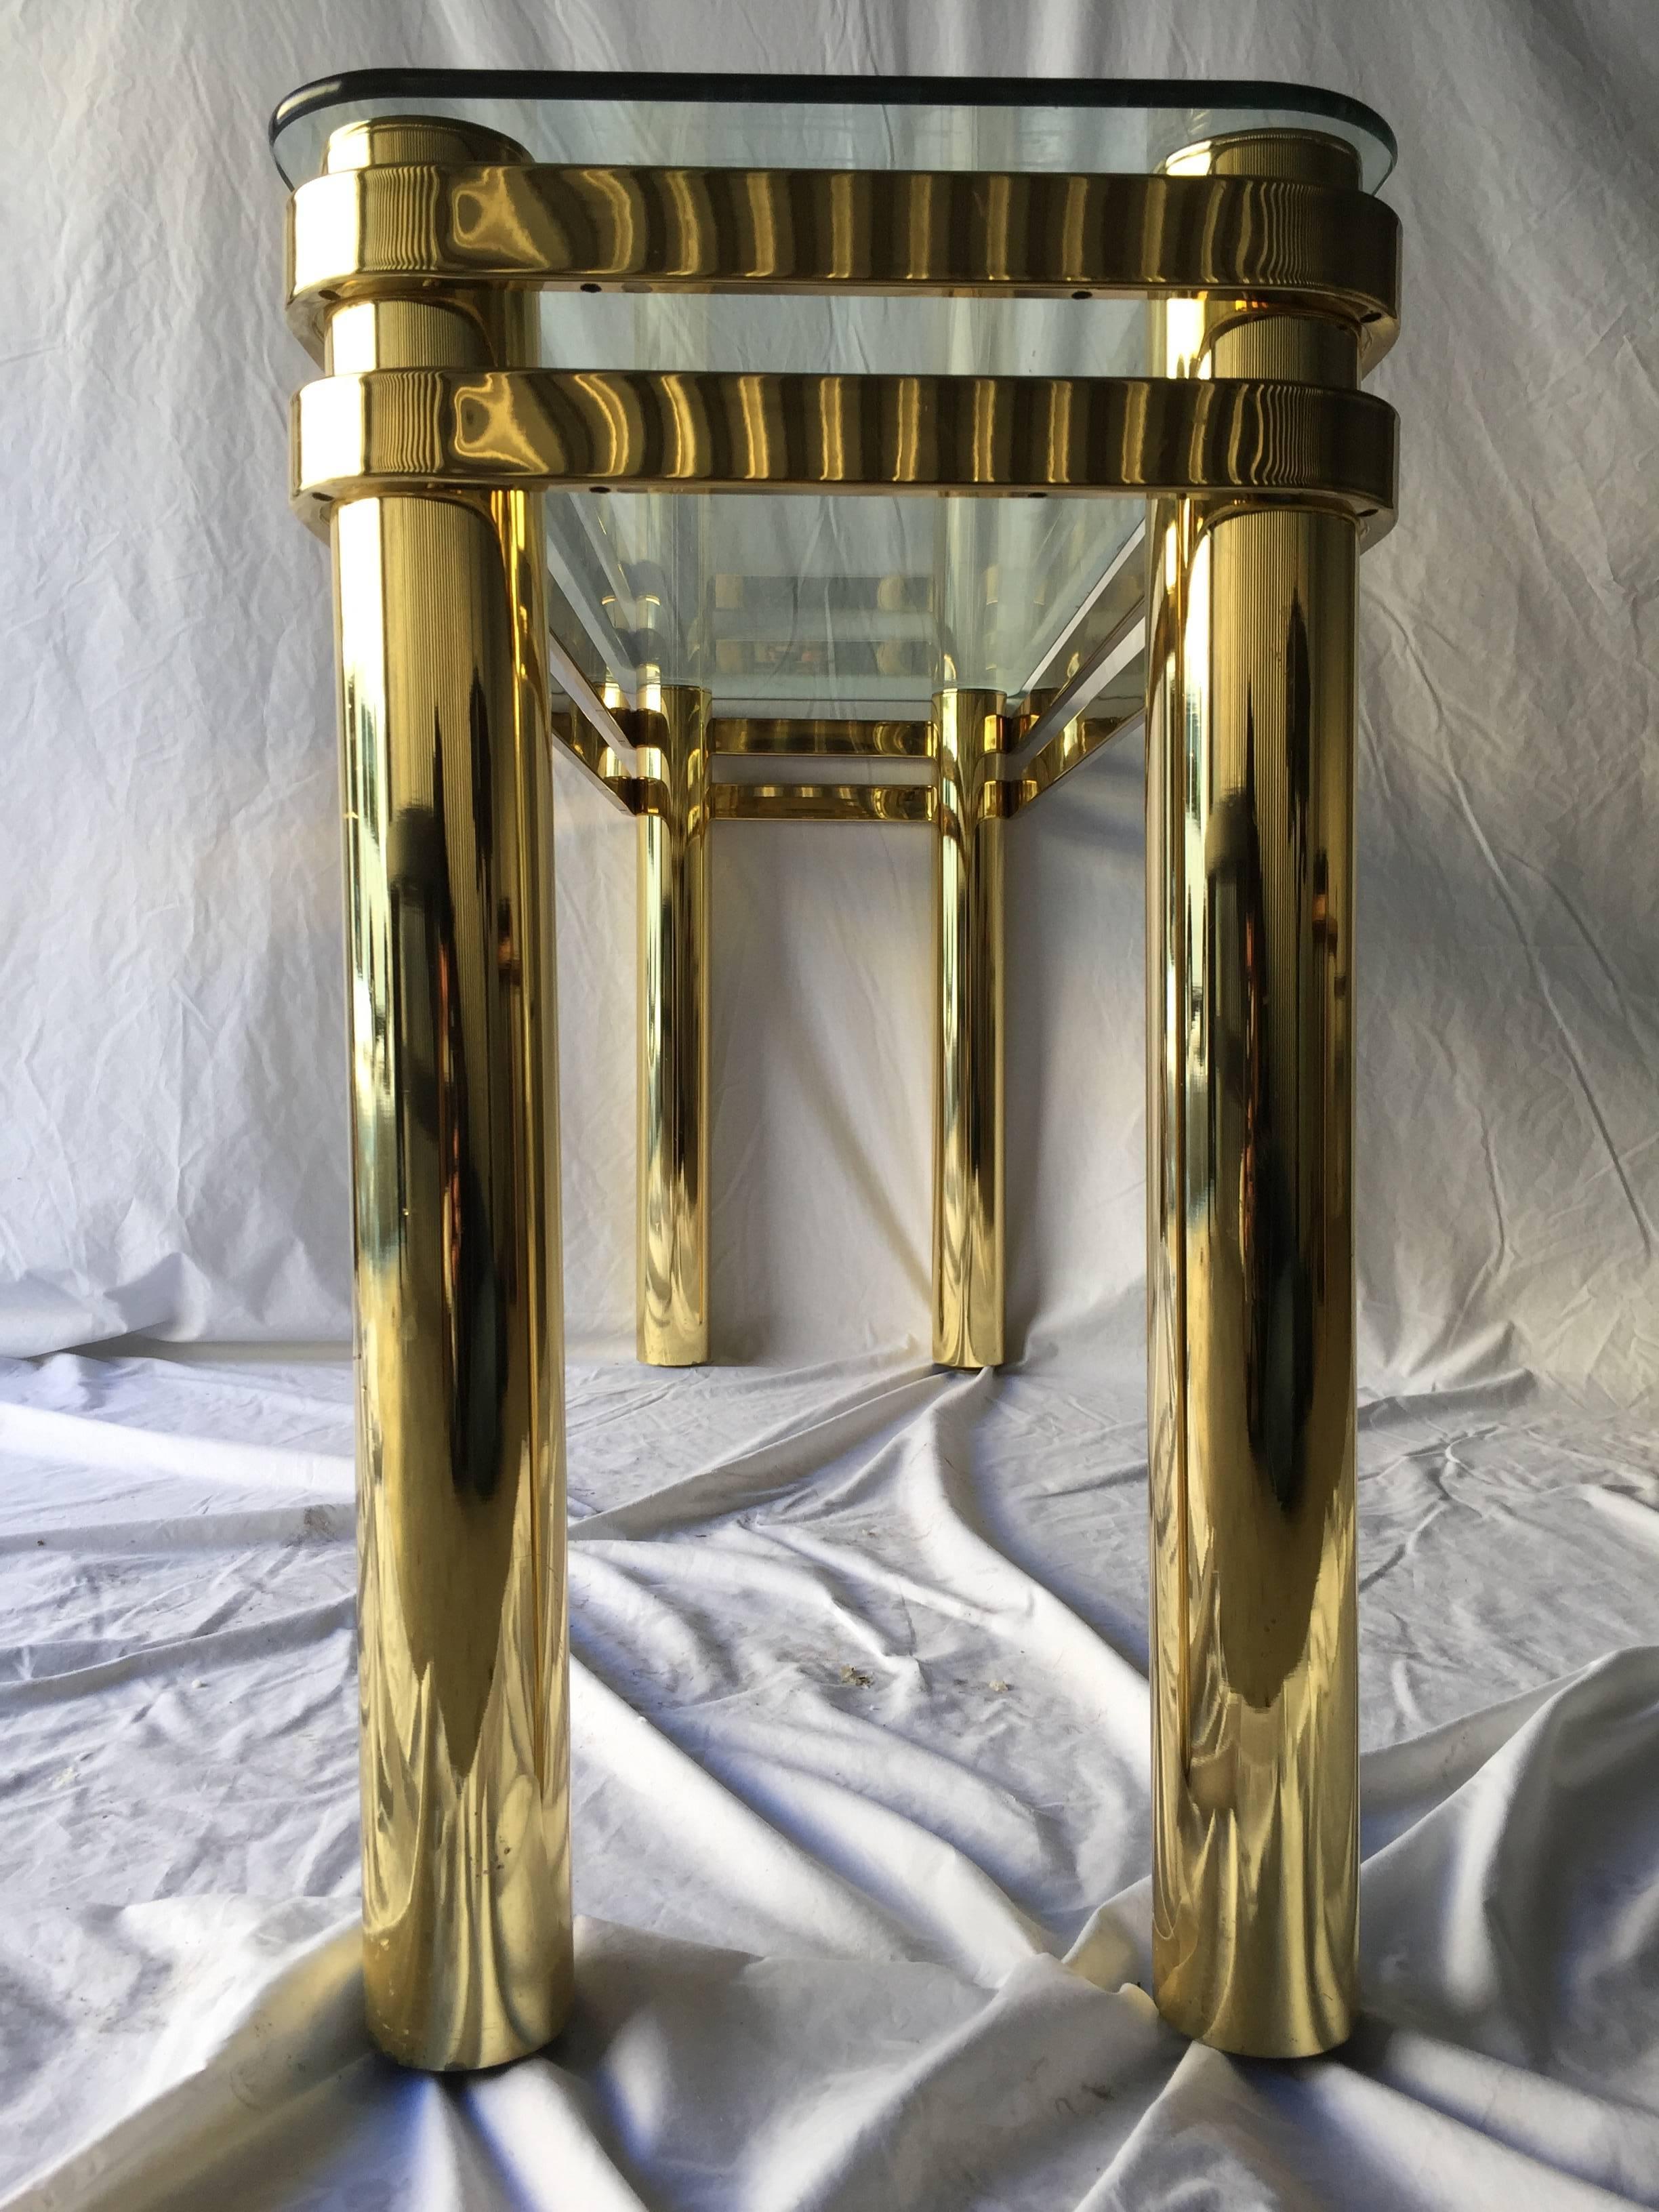 Vintage Pace Style Brass Console Table with Tubular Legs and Banded Design 4